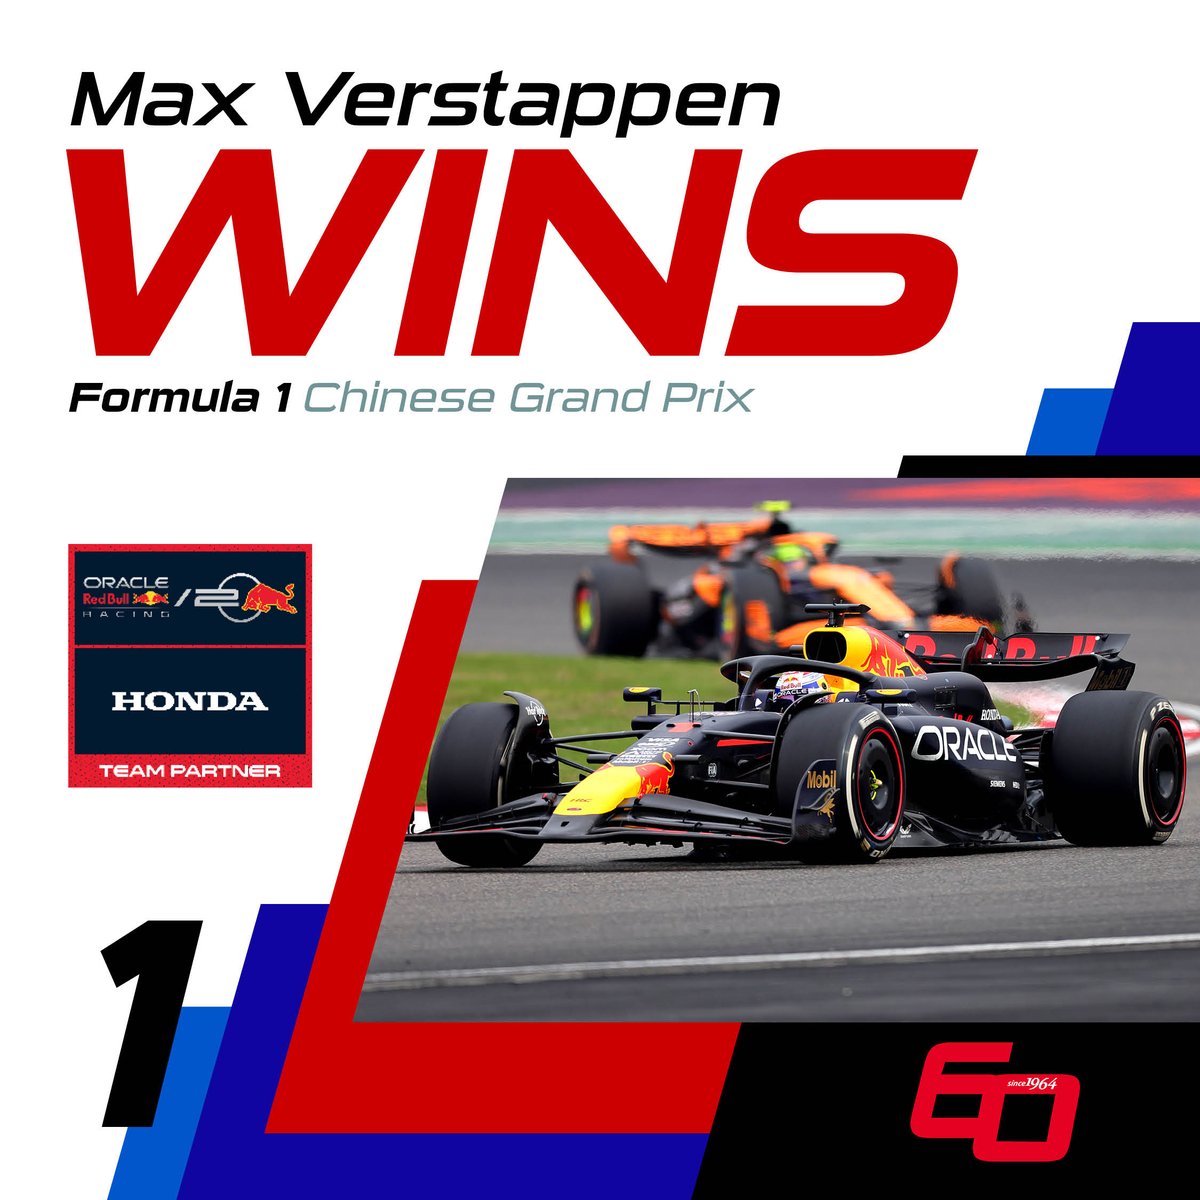 A flawless performance from Max Verstappen today! #Honda #F1 #ChineseGP